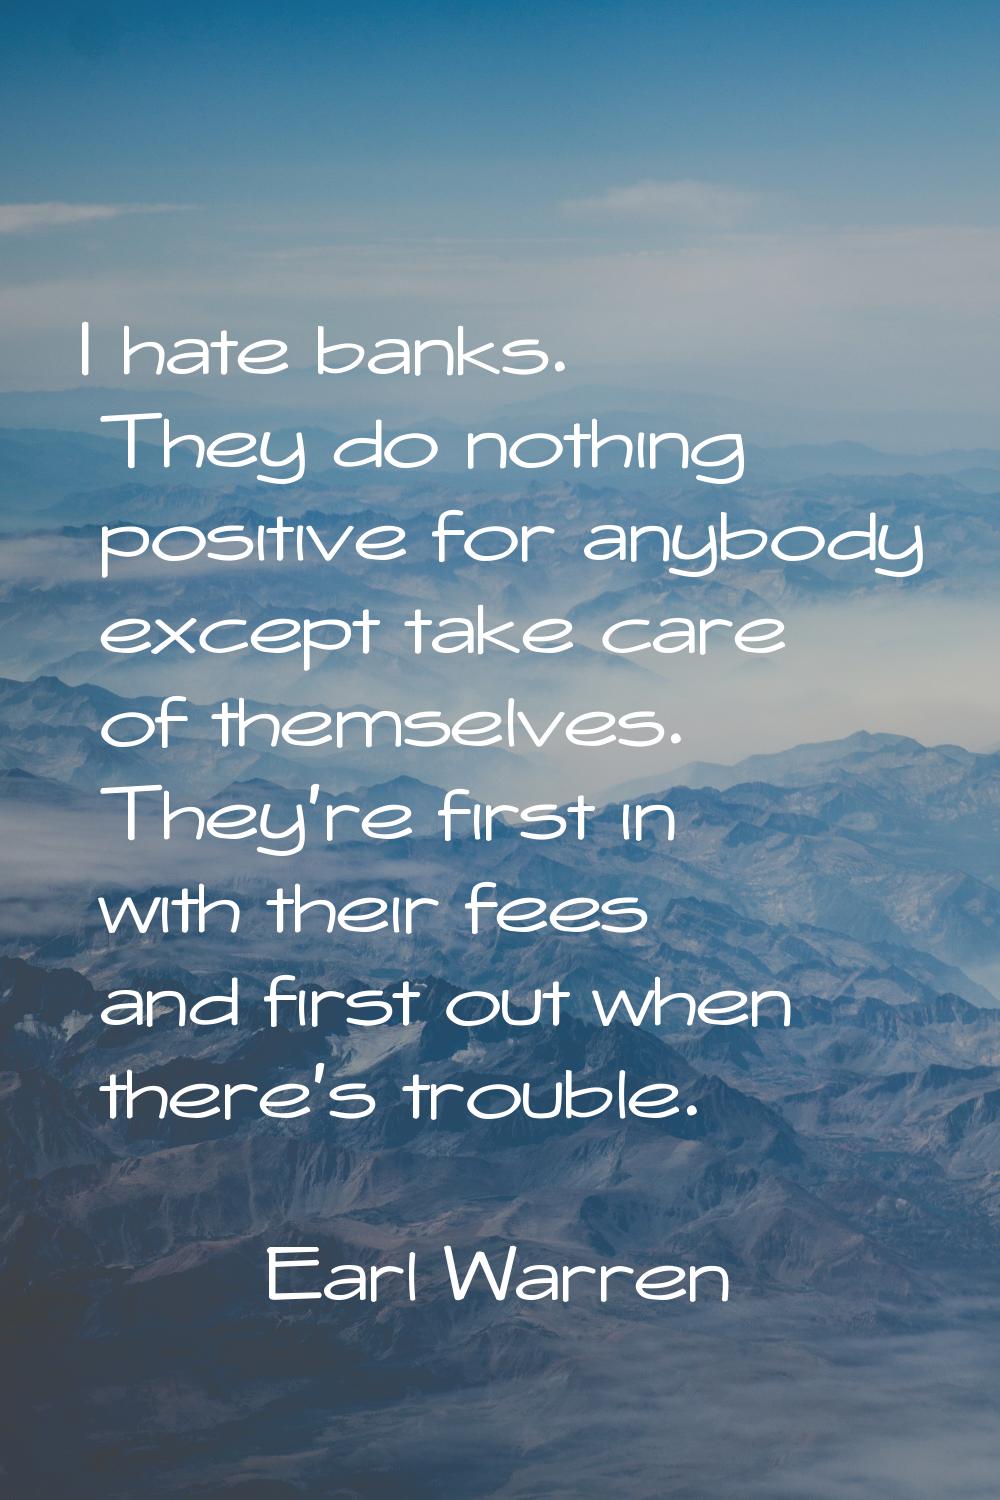 I hate banks. They do nothing positive for anybody except take care of themselves. They're first in